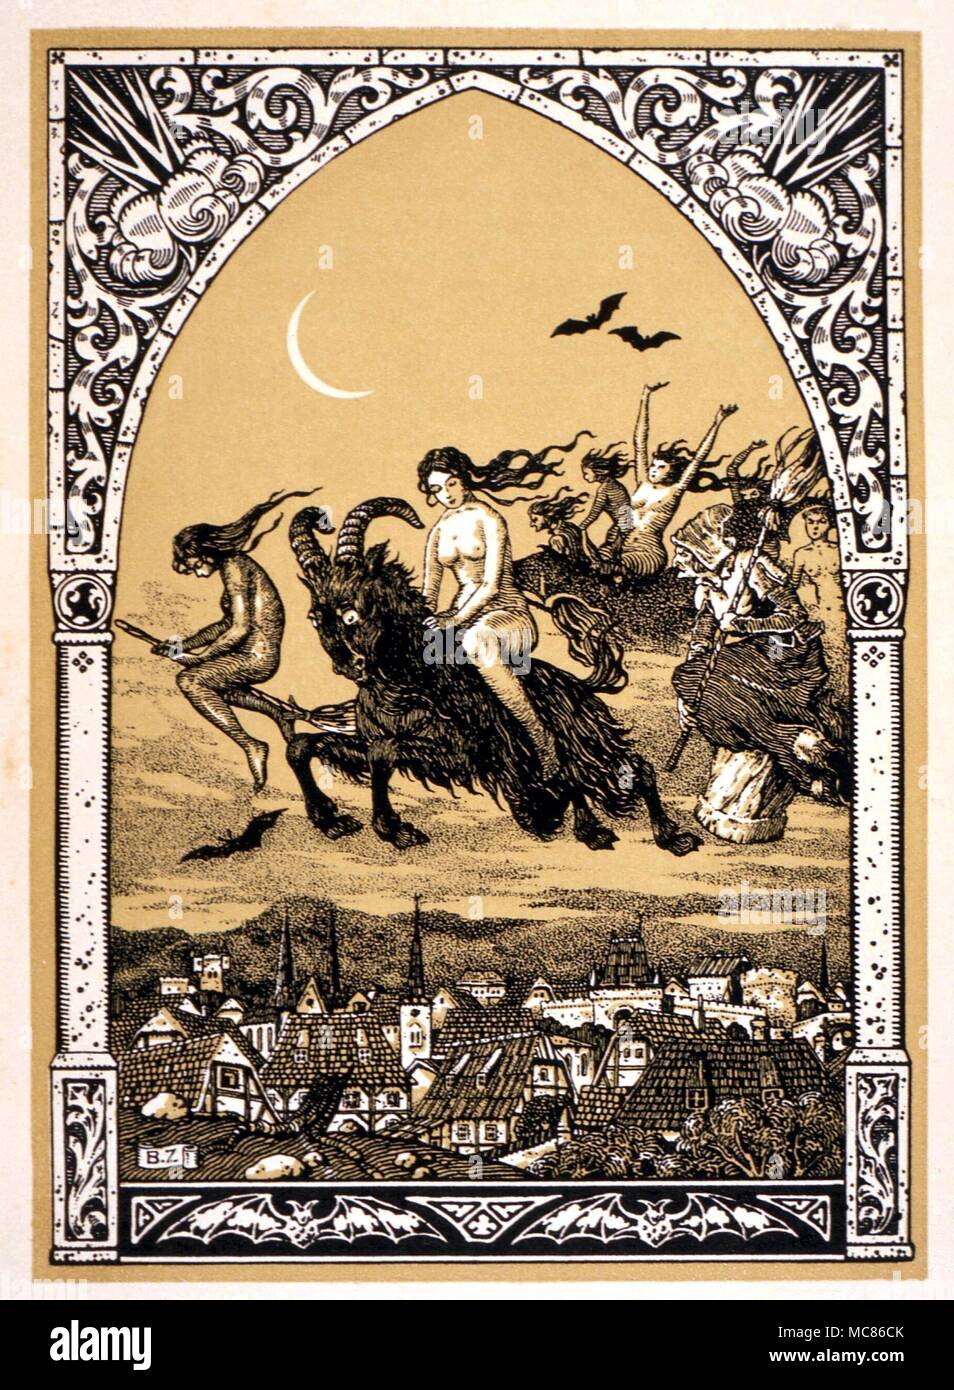 WITCHCRAFT Transvection on a goat by the witch Babin. Lithograph from the 1926 edition of Carron's La Vie Execrable de Guillemette Babin, Sorciere Stock Photo